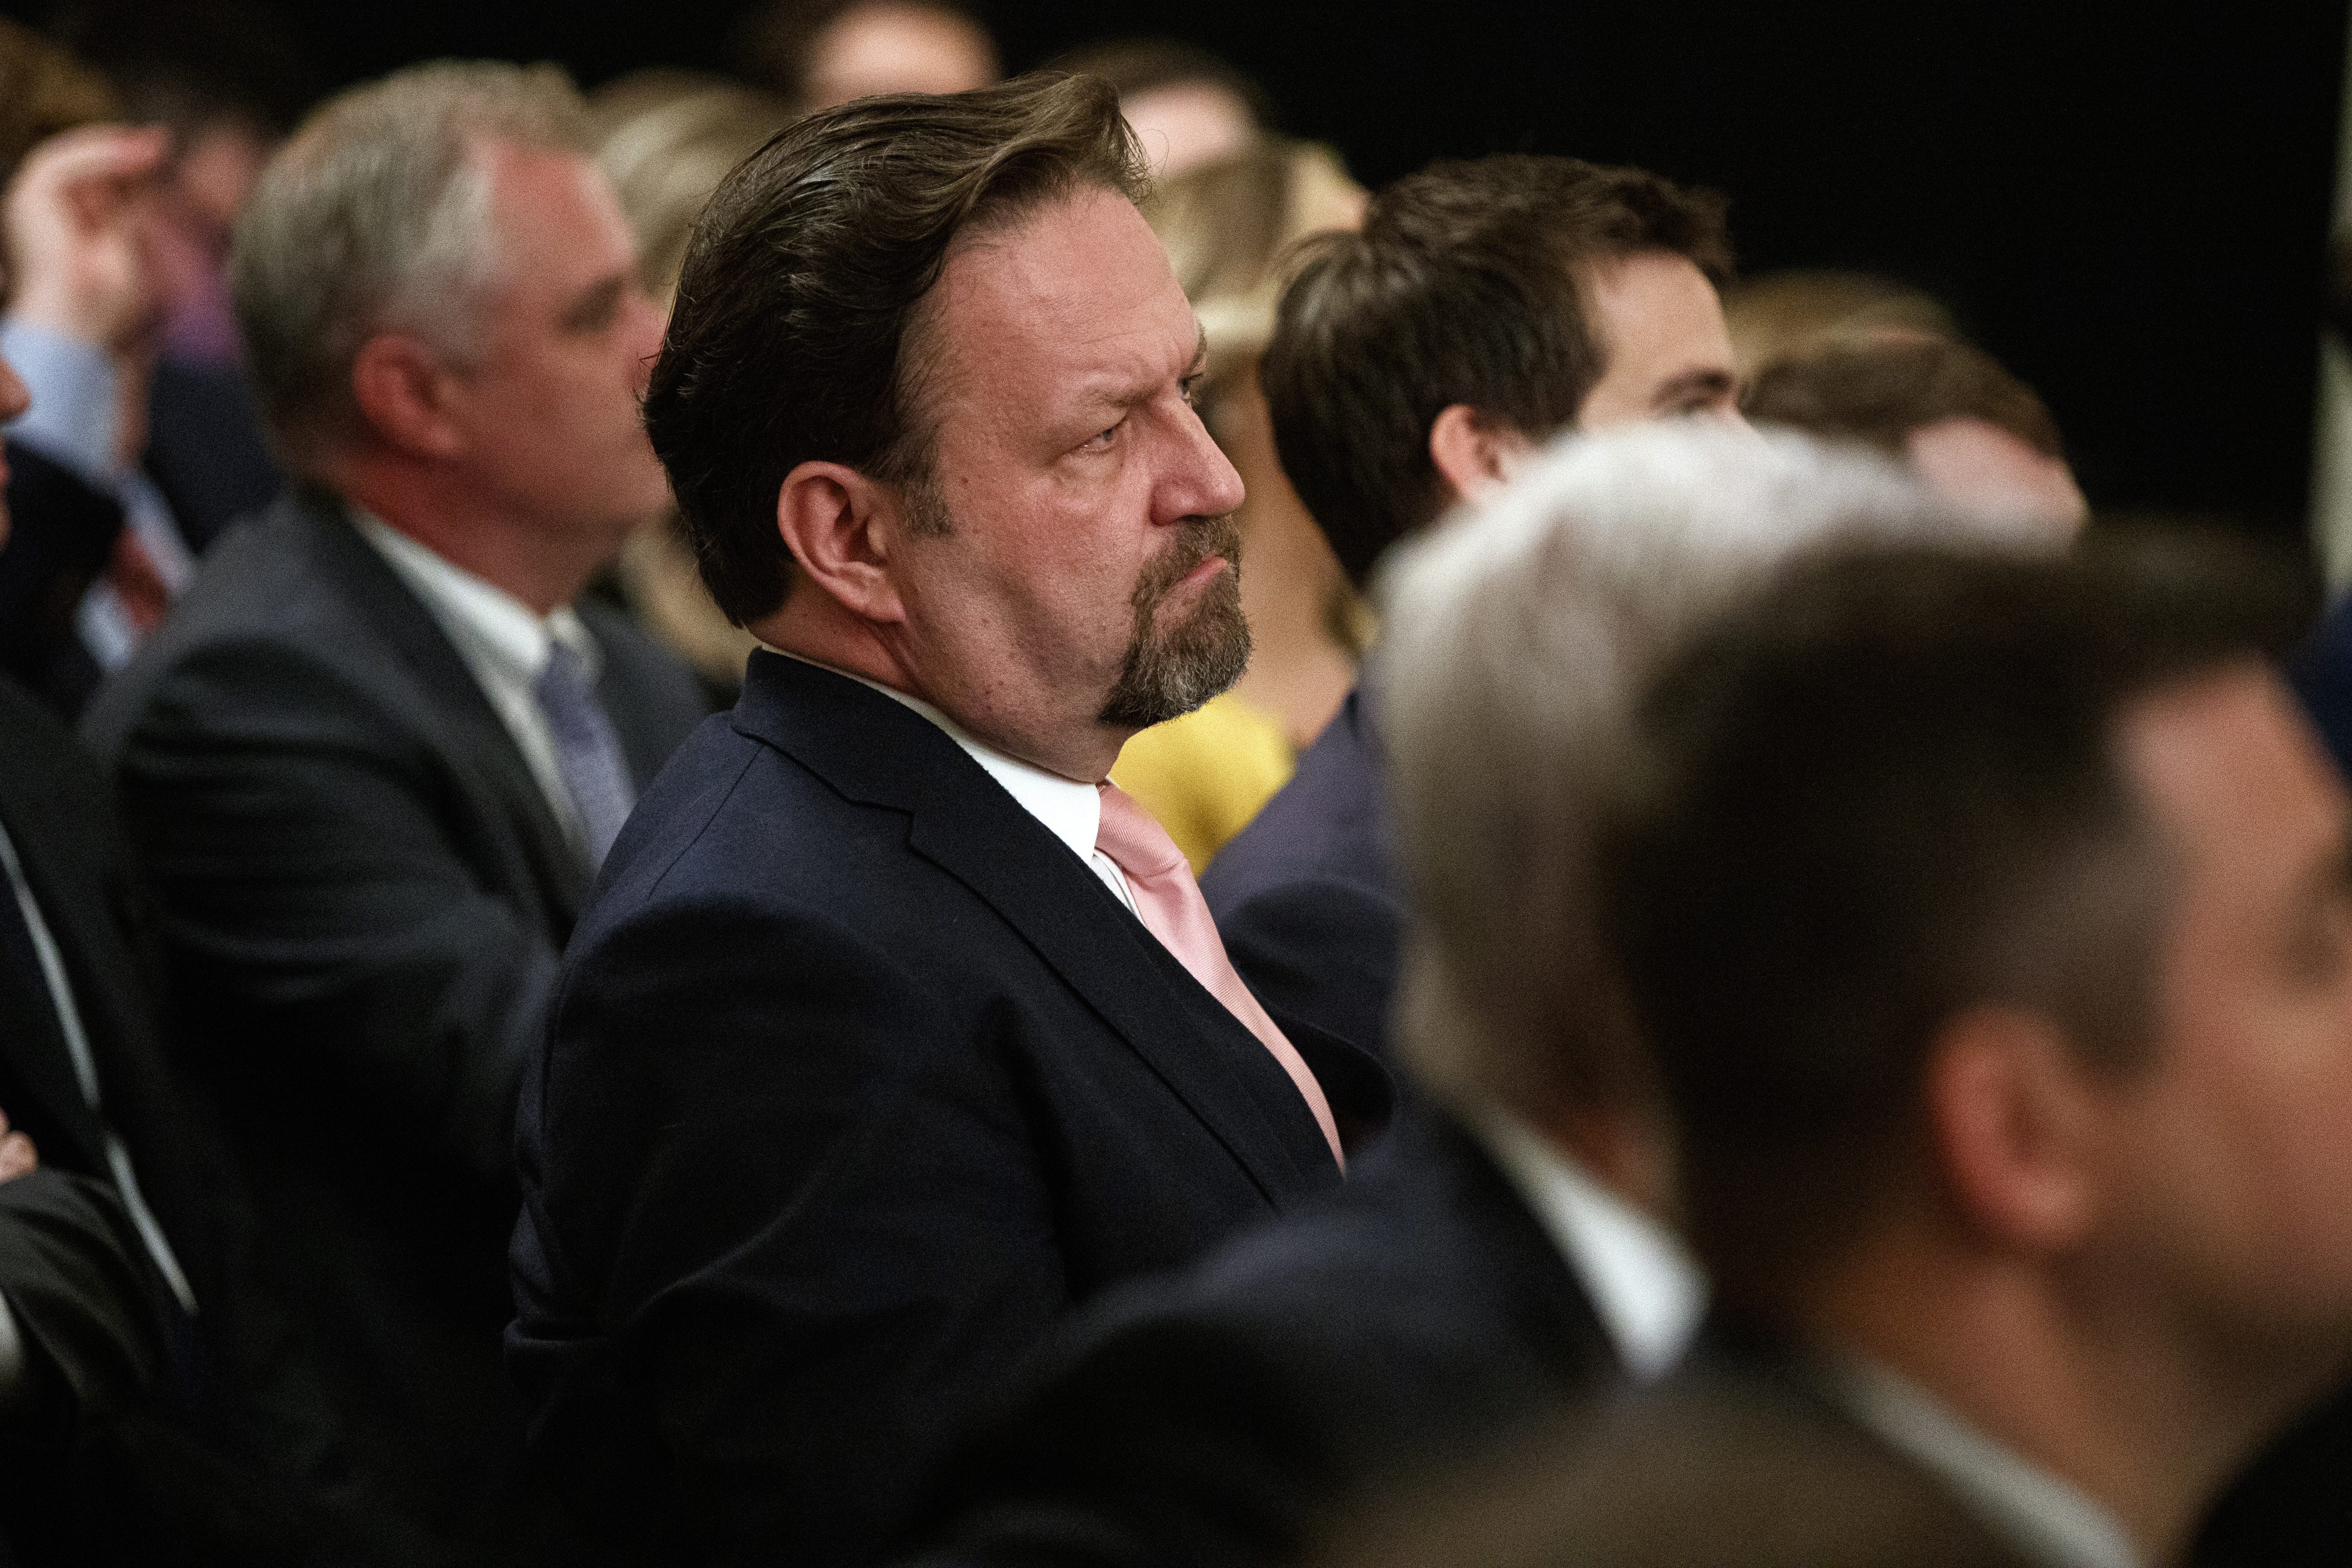 Radio host Seb Gorka listens as President Donald Trump speaks during the "Presidential Social Media Summit" in the East Room of the White House, Thursday, July 11, 2019, in Washington. (AP Photo/Evan Vucci)